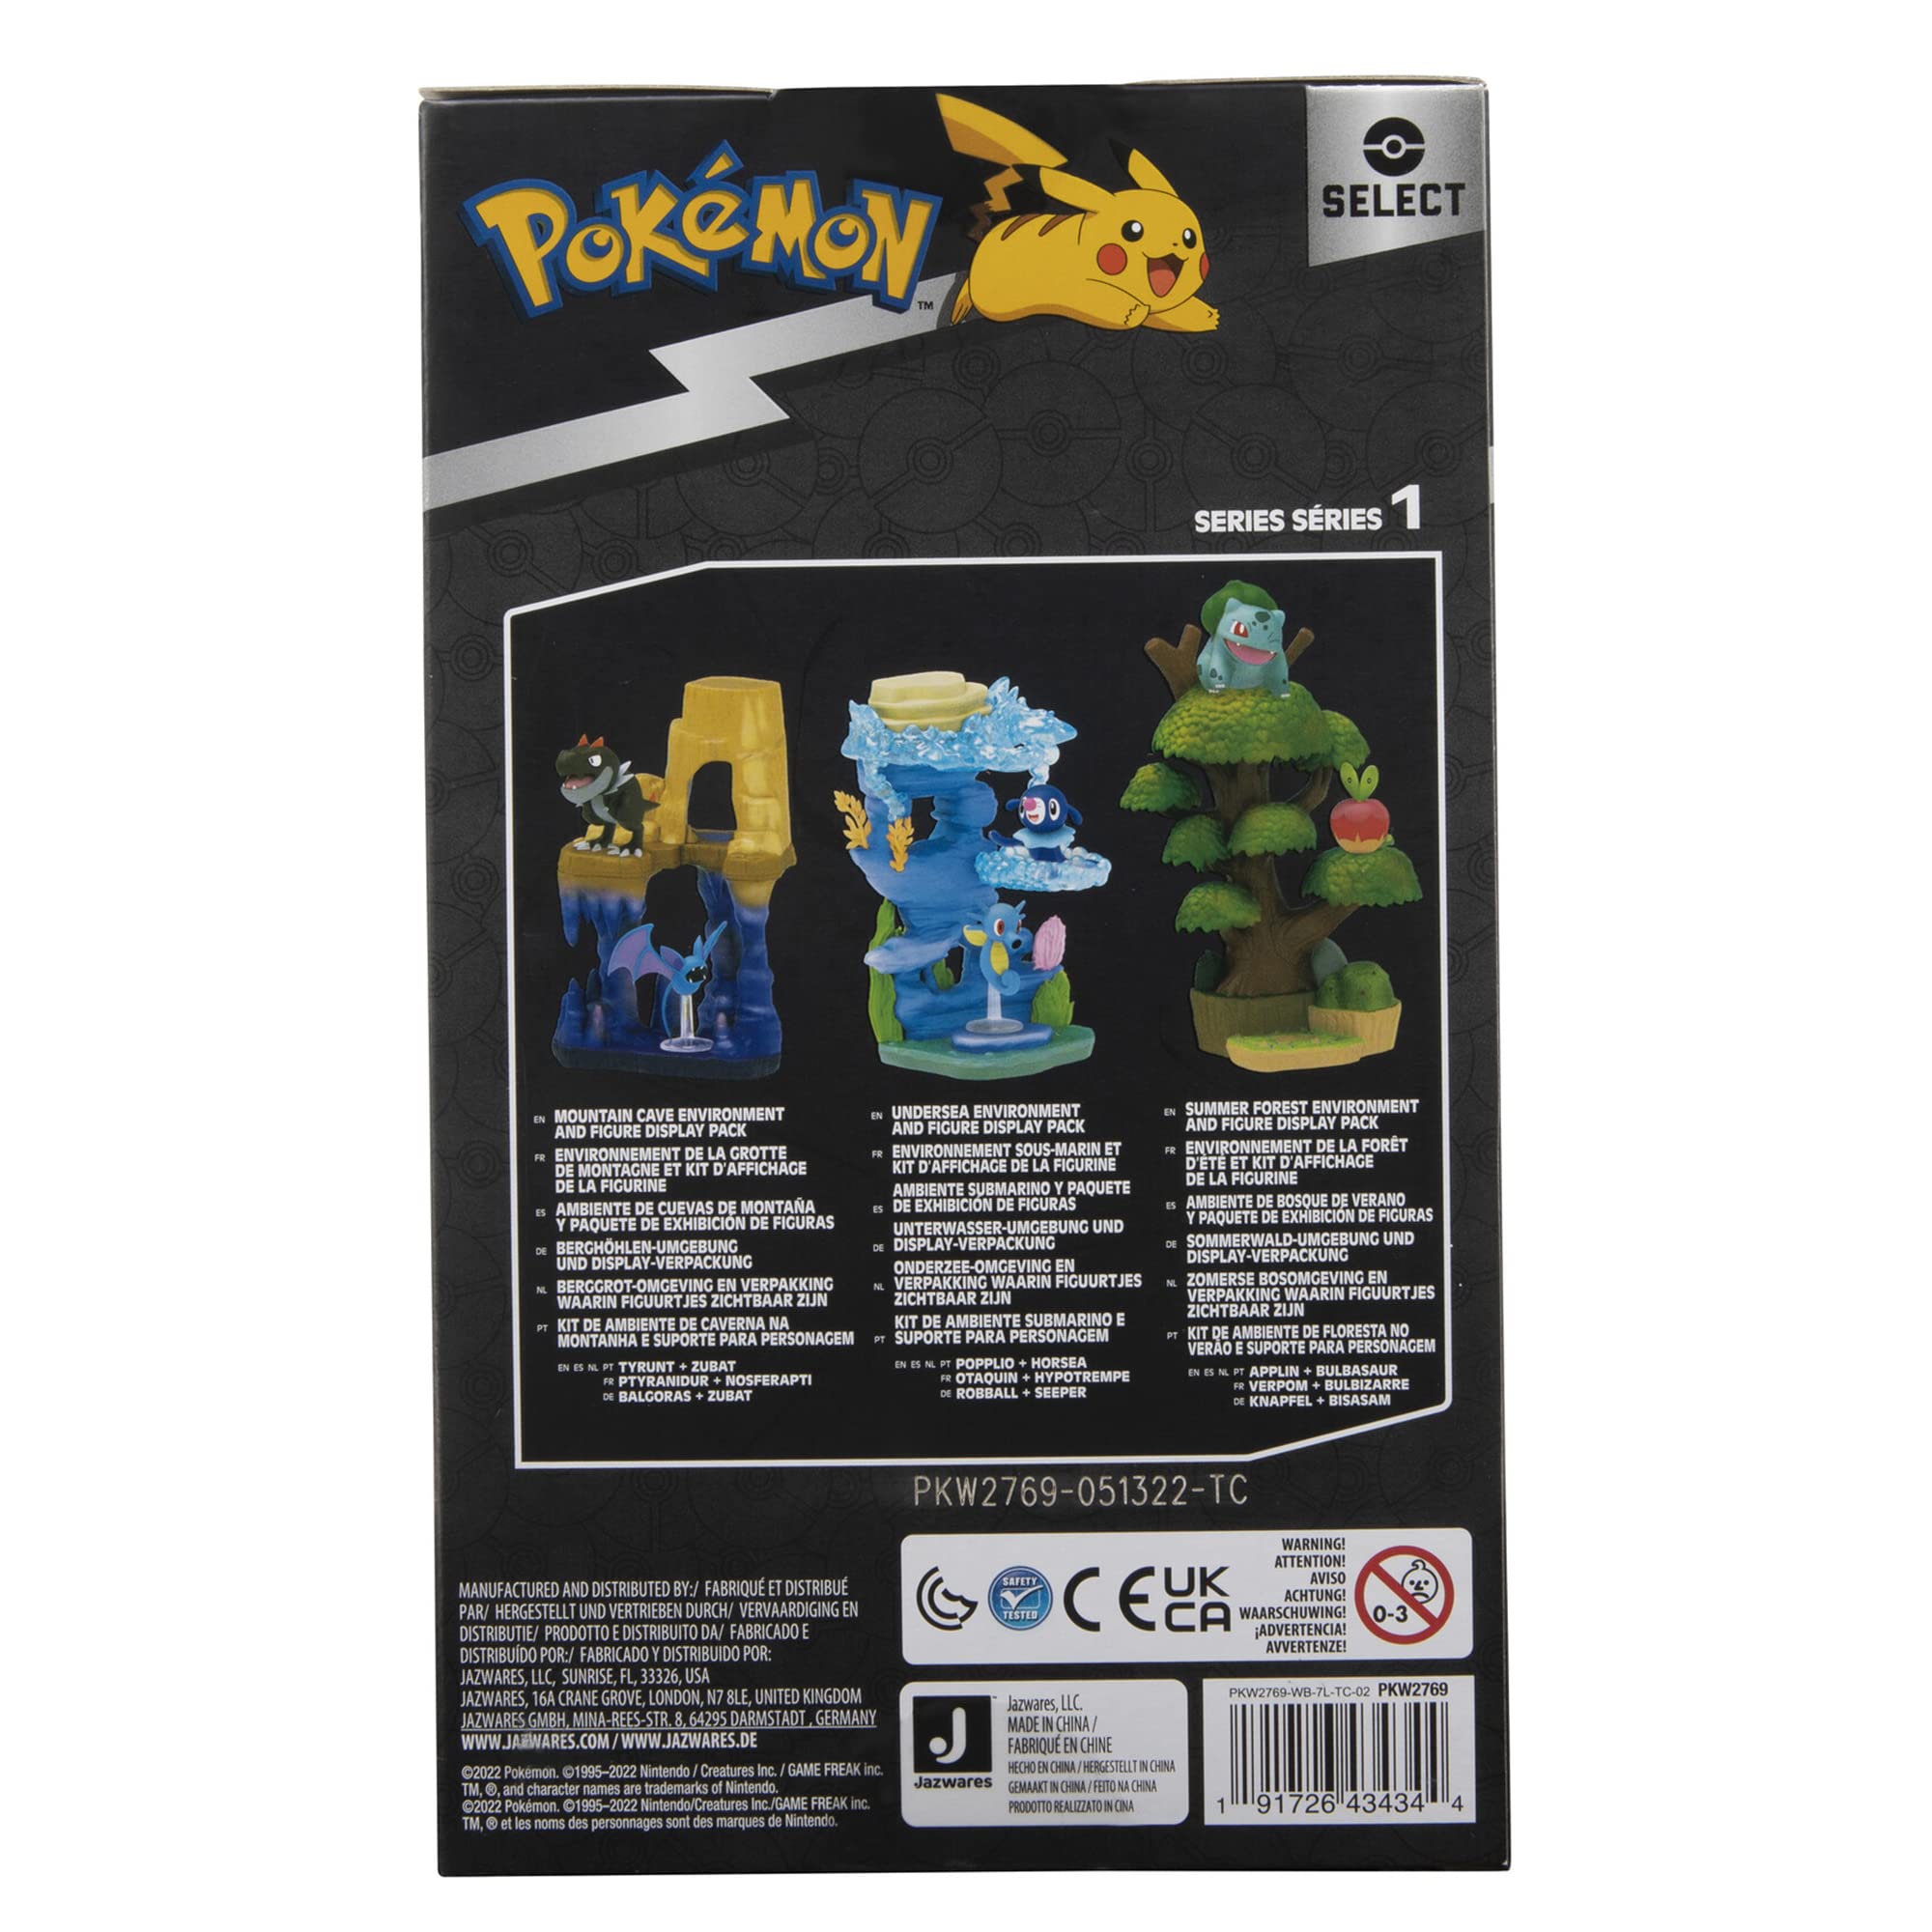 Pokemon Dragon-type Select Mountain Cave Environment - Multi-Level Display Set with 2-Inch Tyrunt and Zubat Battle Figures